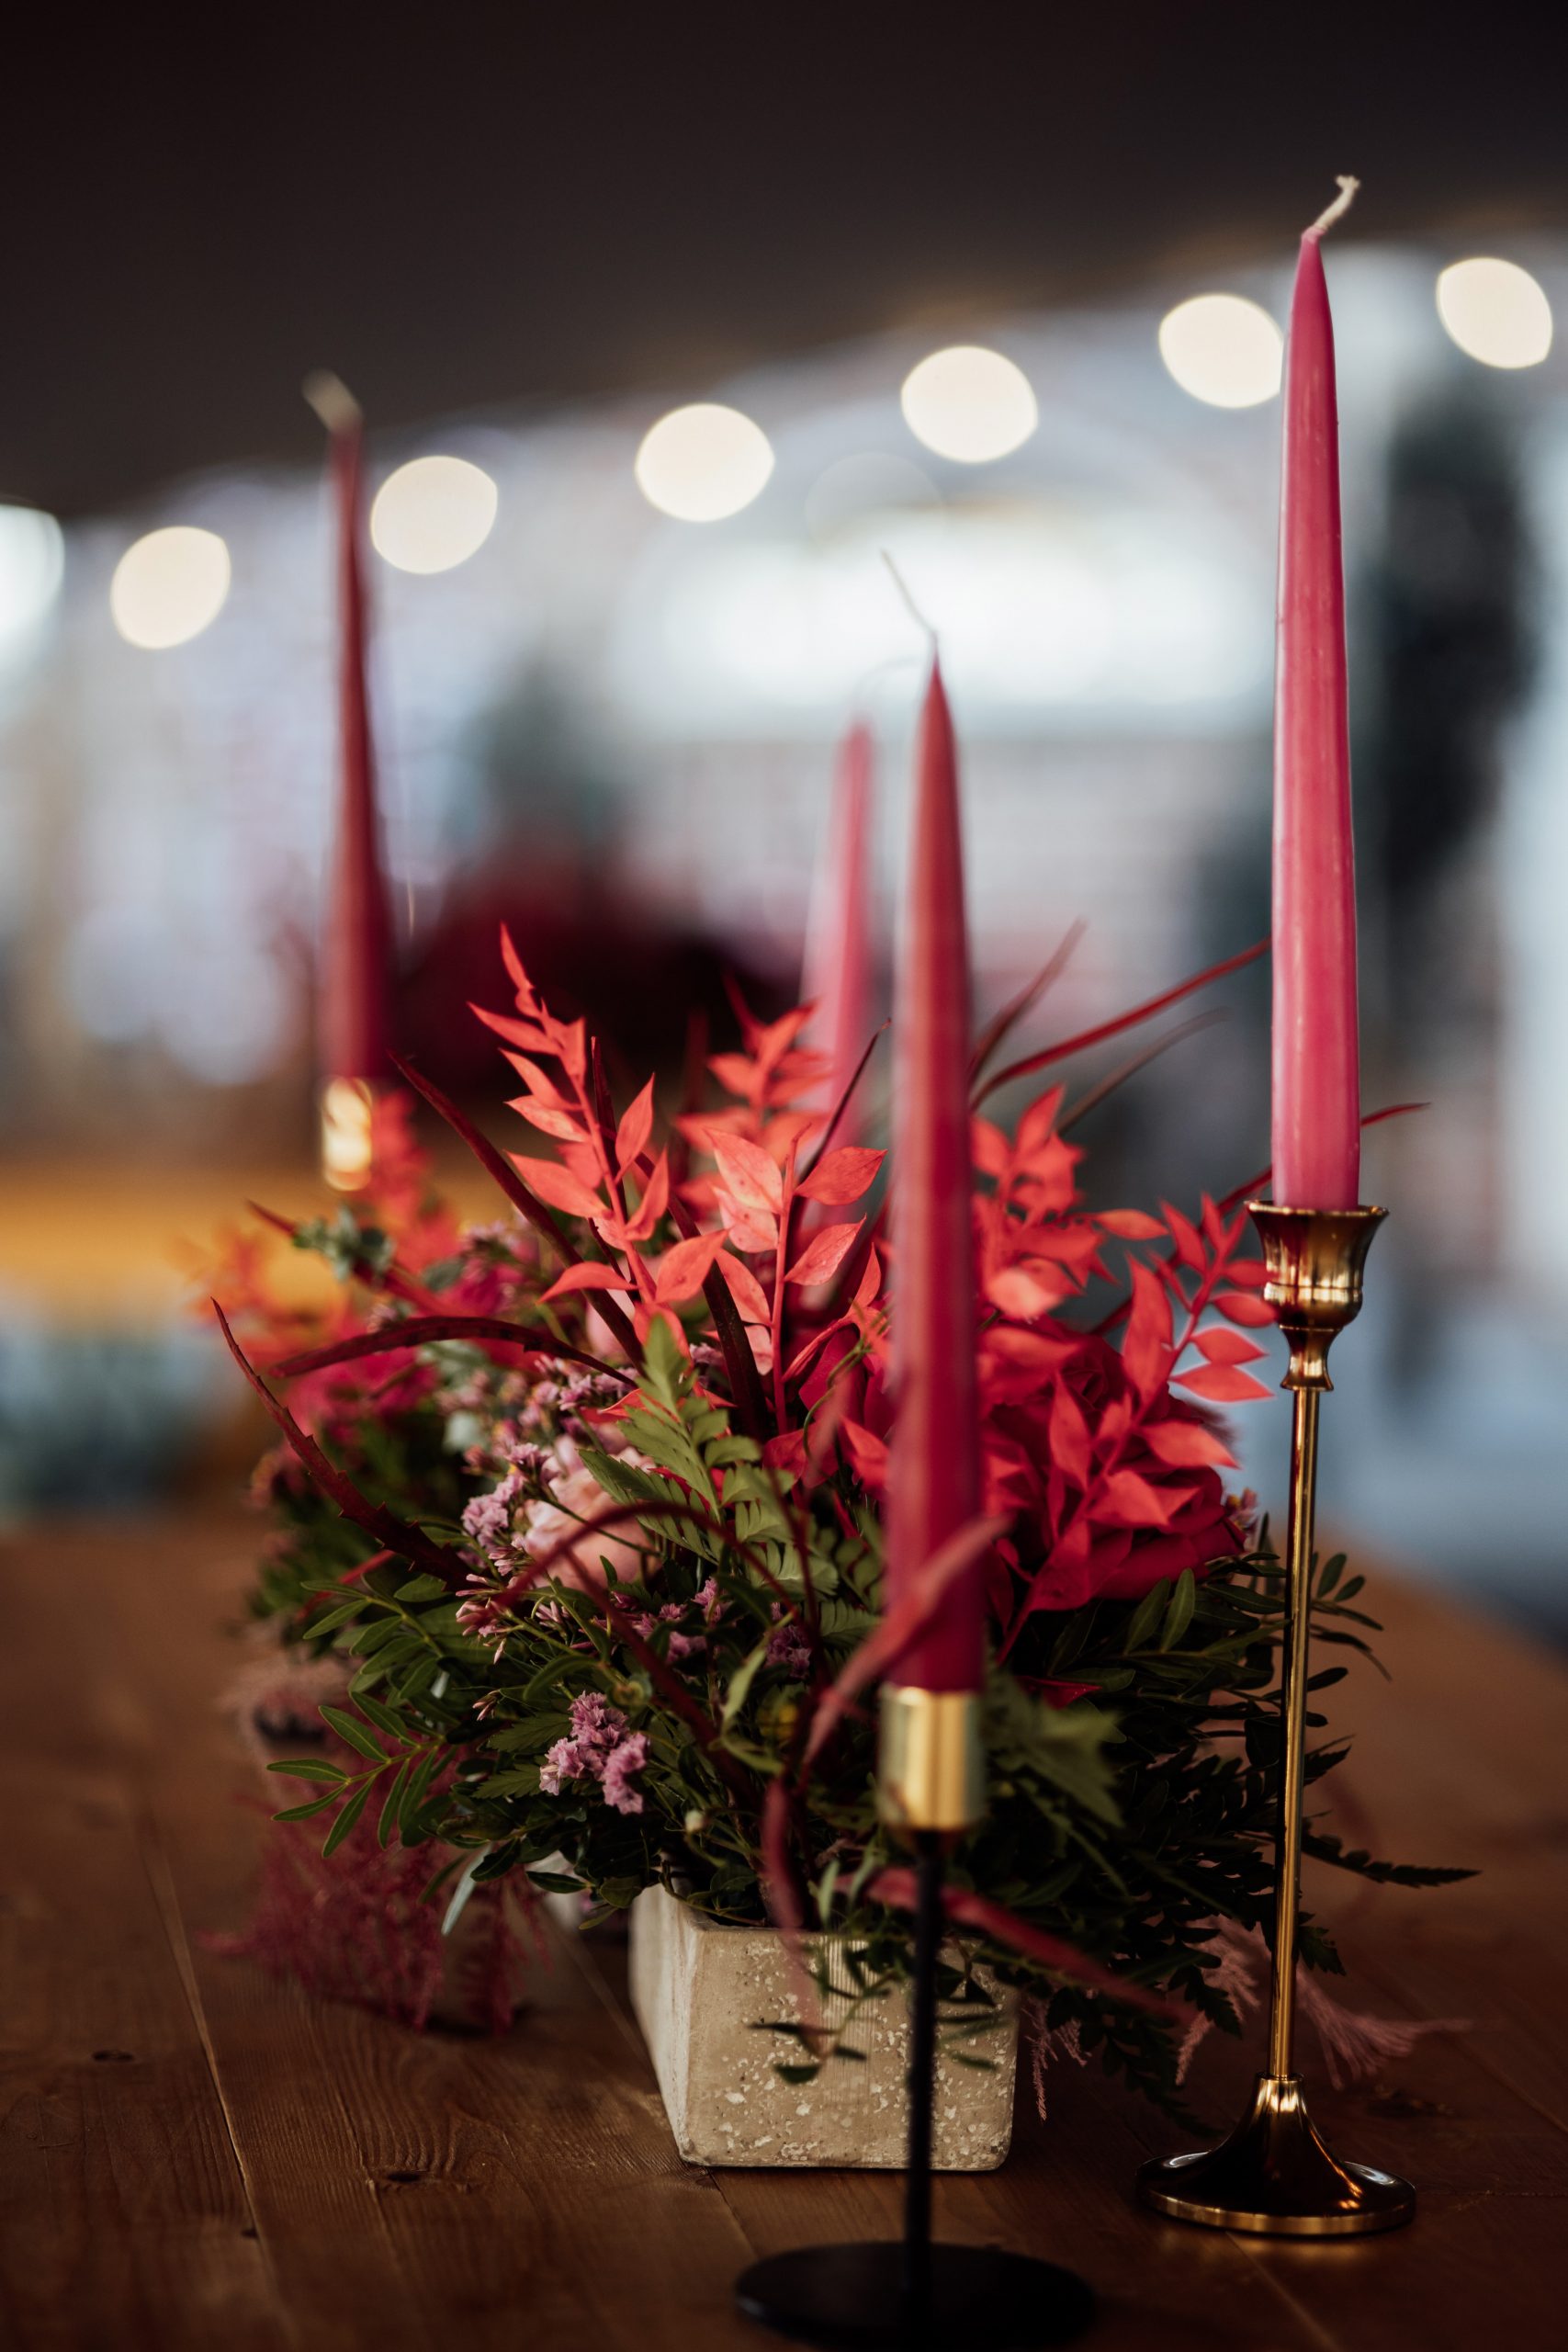 A display of pink and red florals and candles on a trestle table